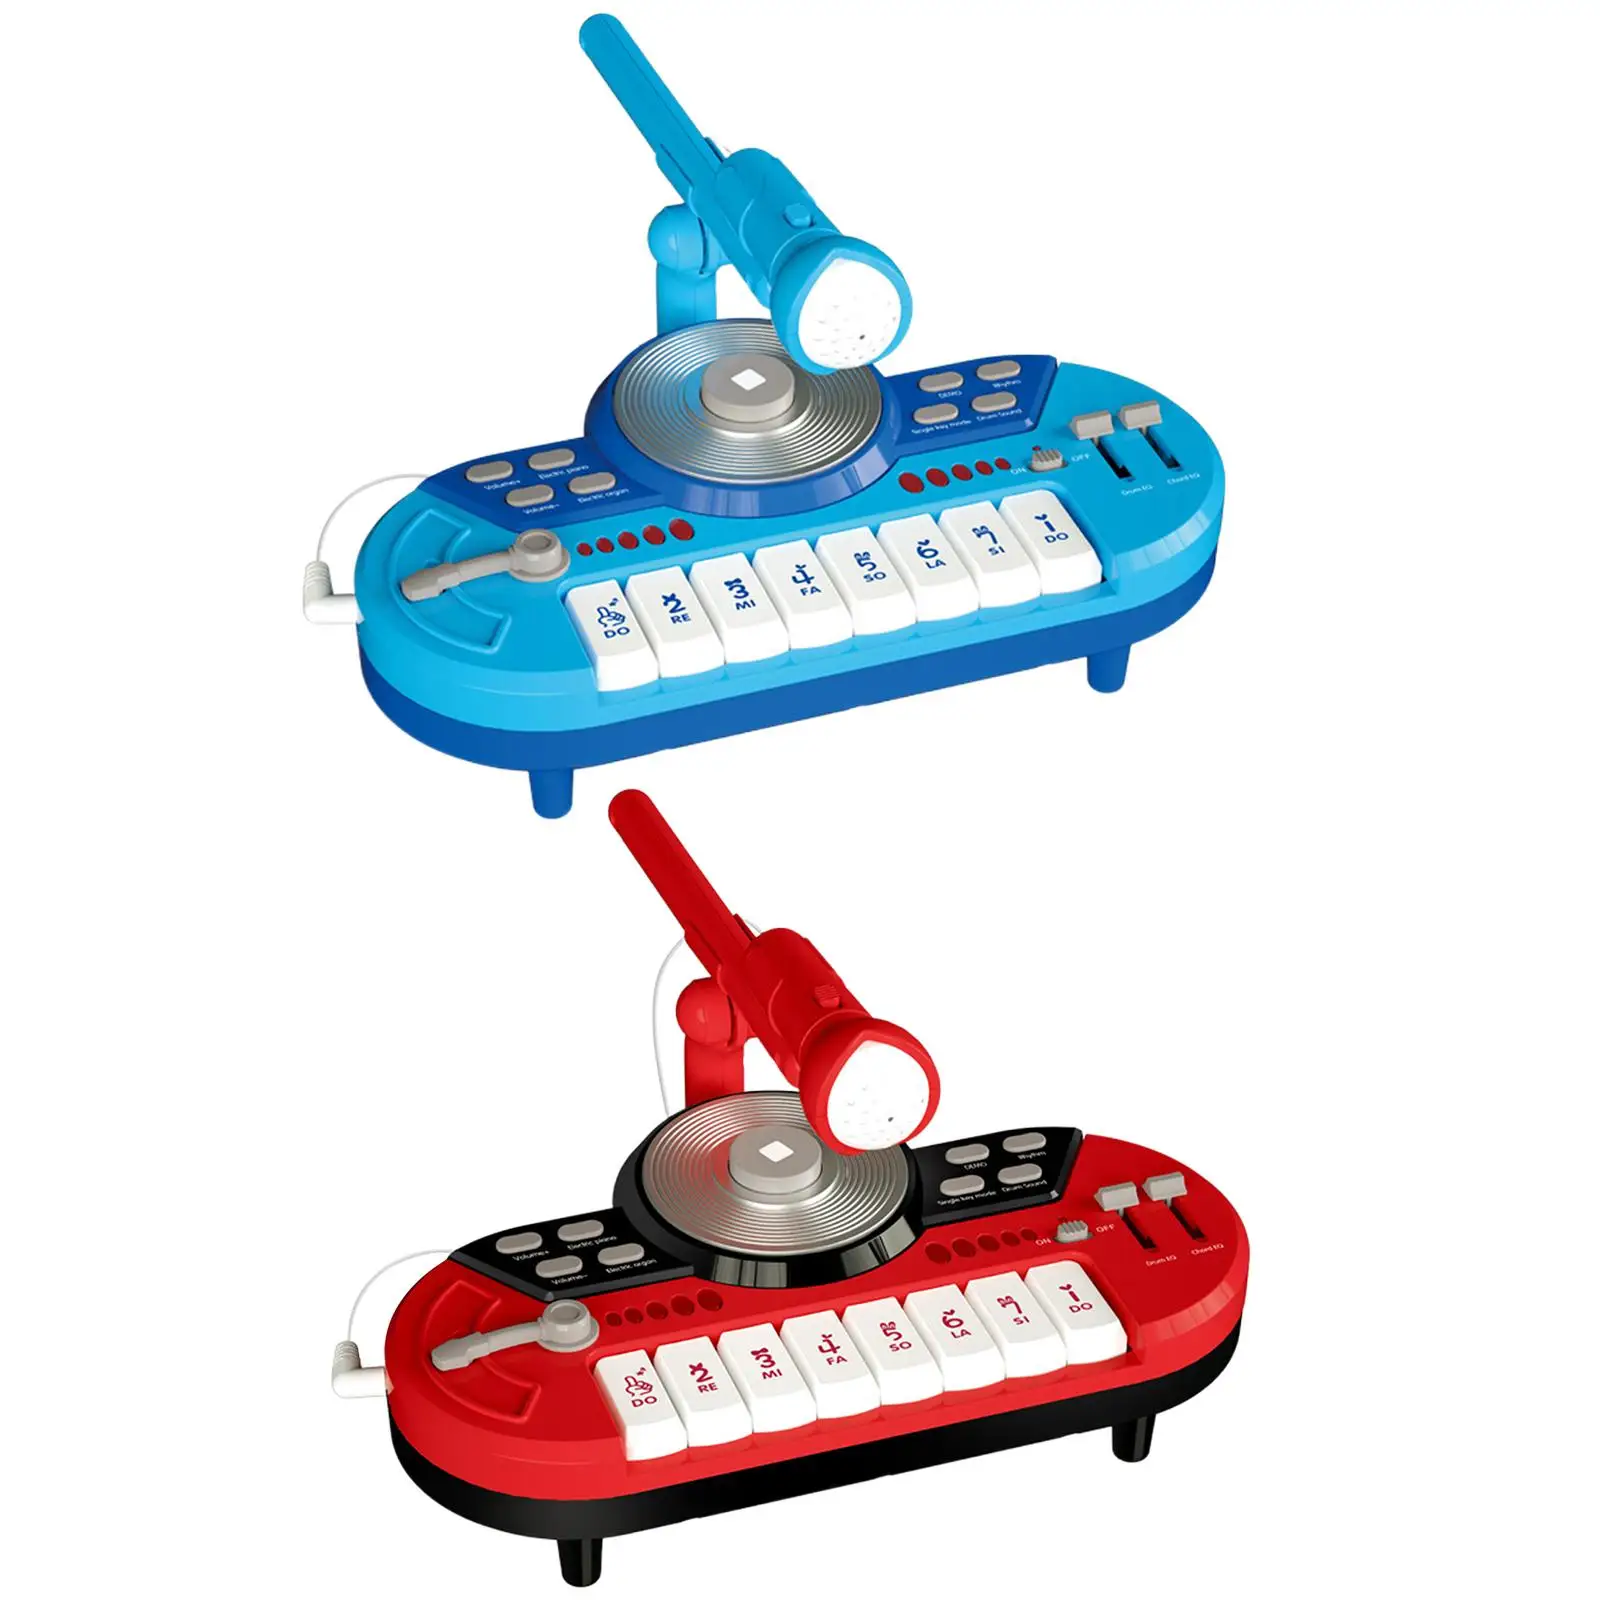 Mixer Toy with Microphone Educational Musical Piano Toy for Children`s Day